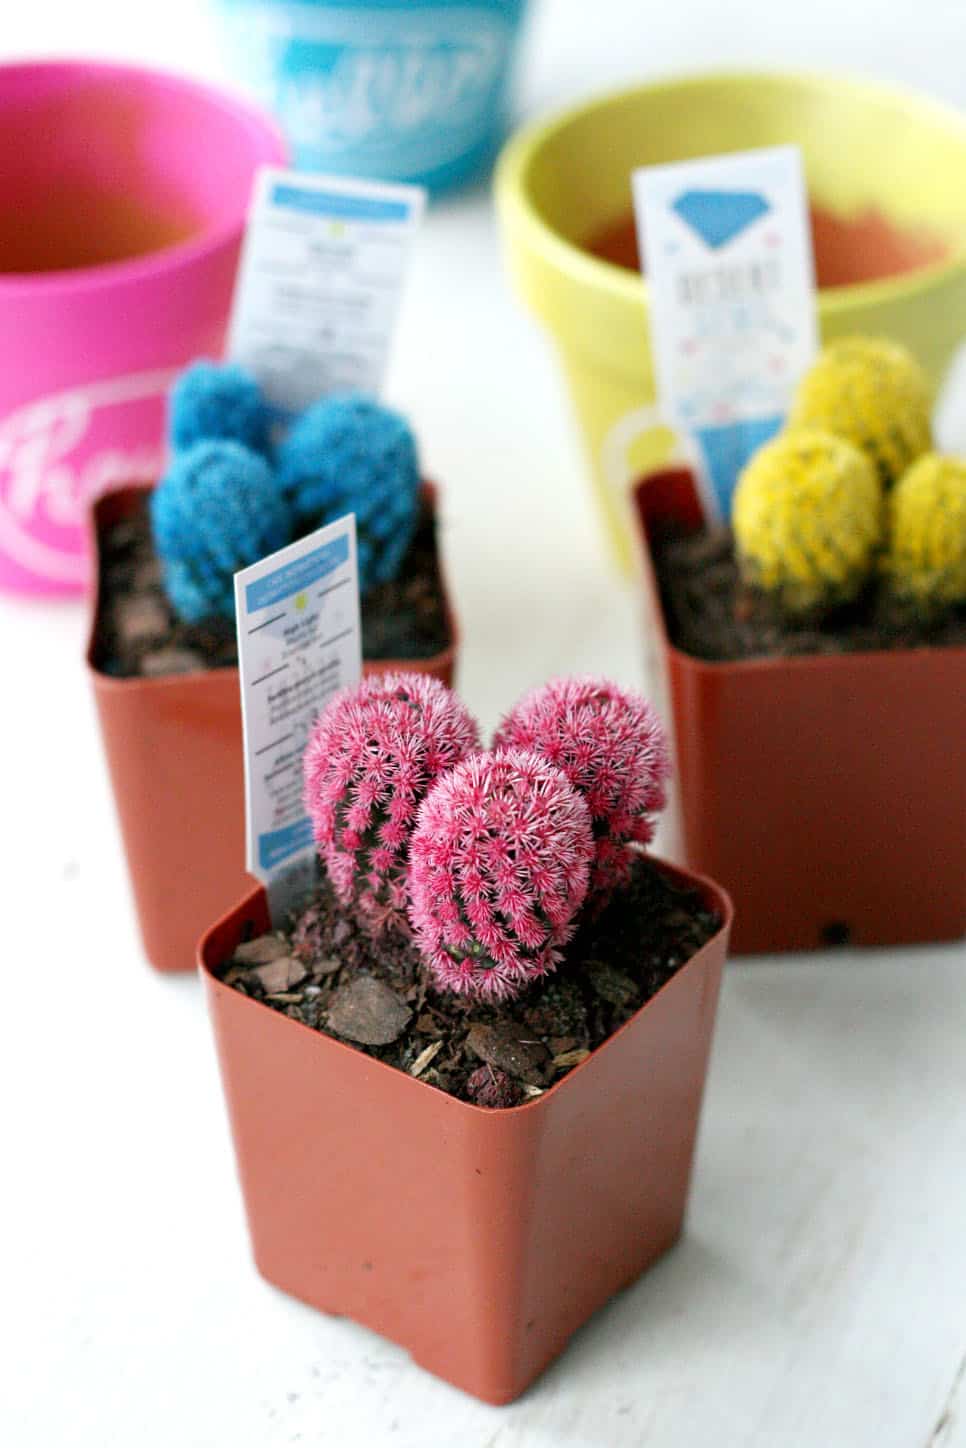 Cacti in blue, yellow, and pink